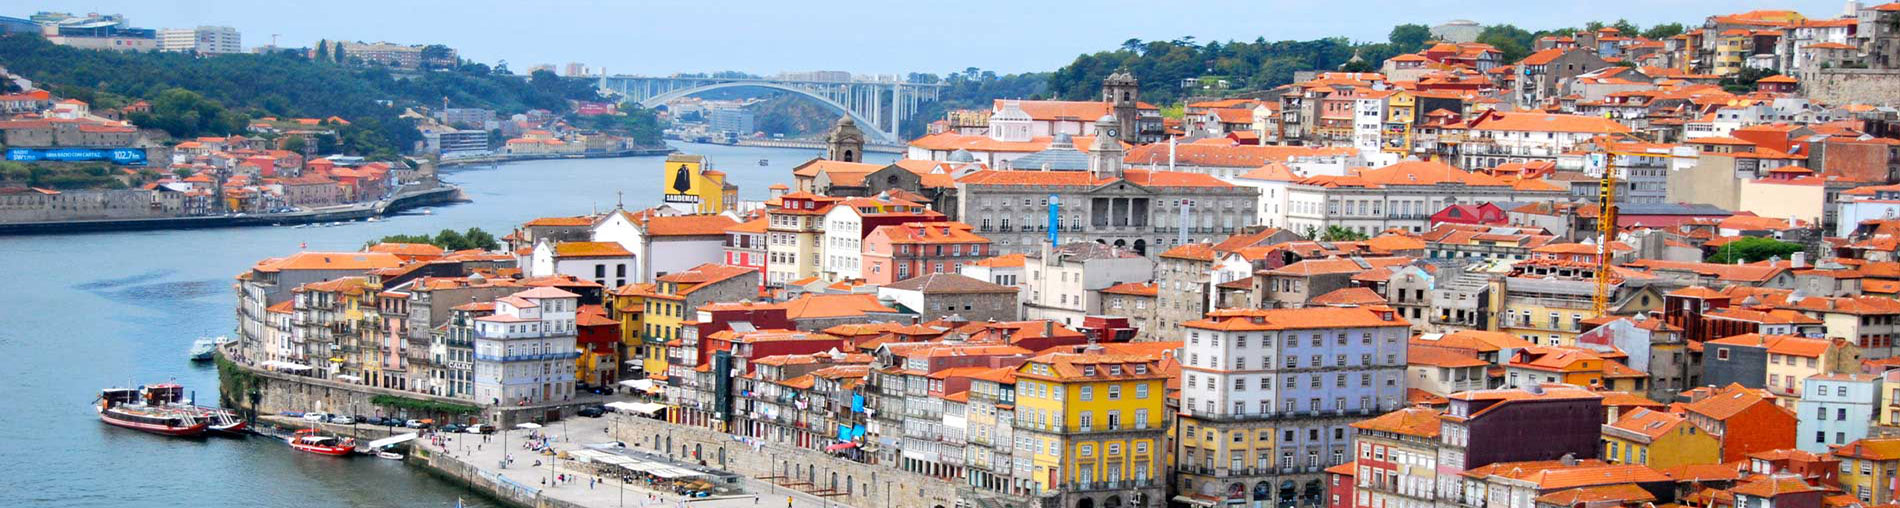 Portugal Holiday Package - 3 Nights